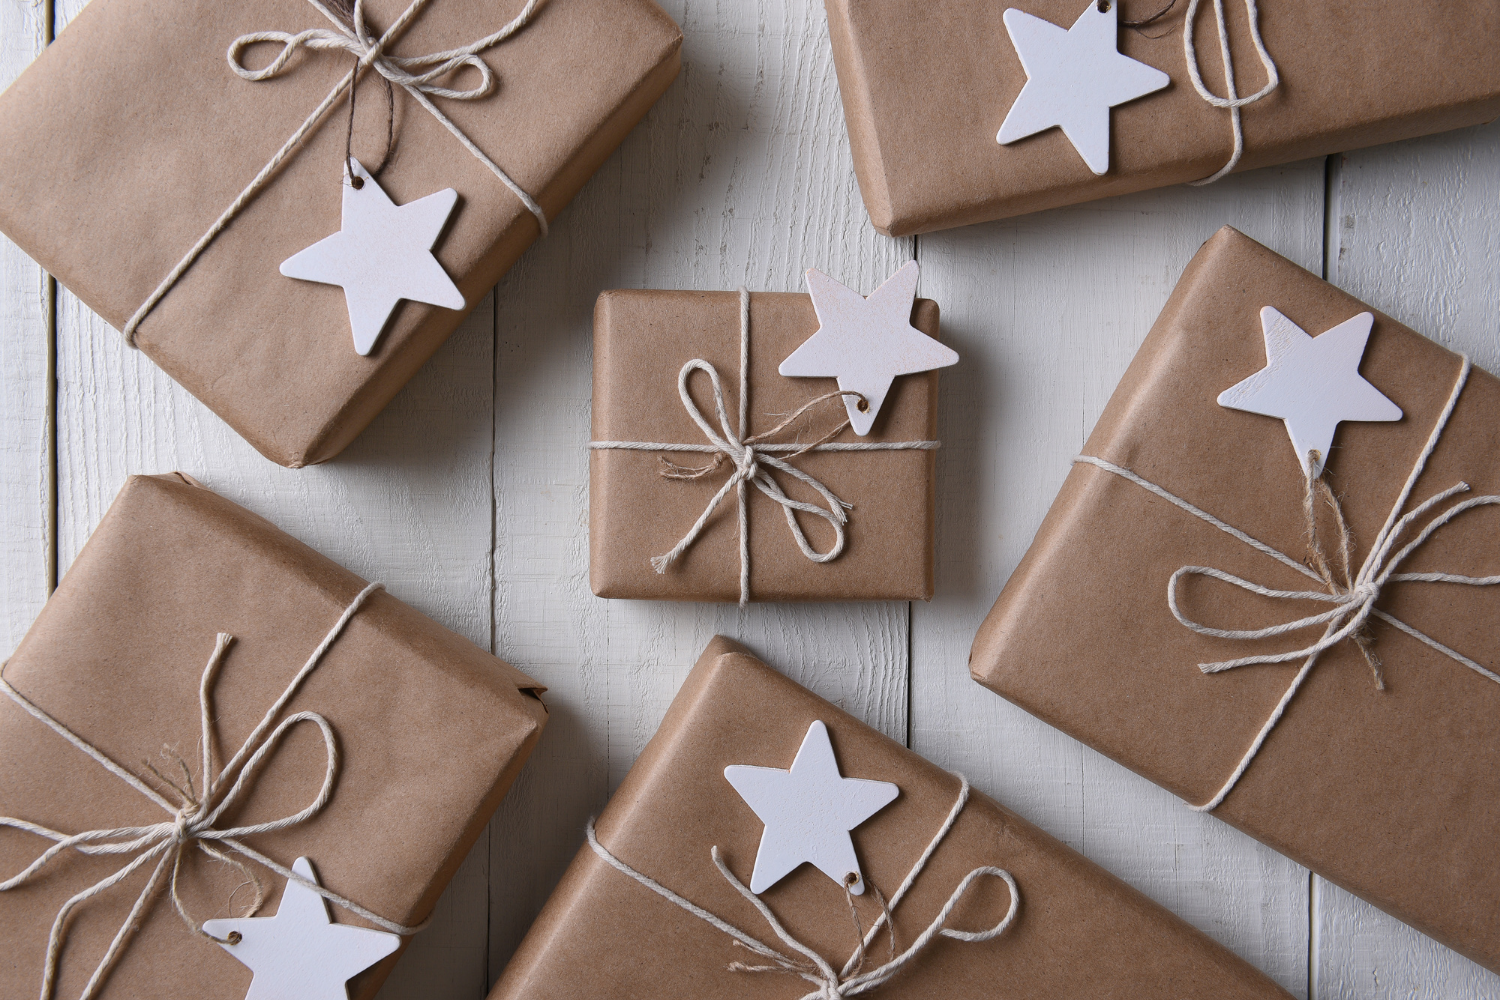 This Christmas, Ditch Secret Santa And Try These 7 Things Instead!